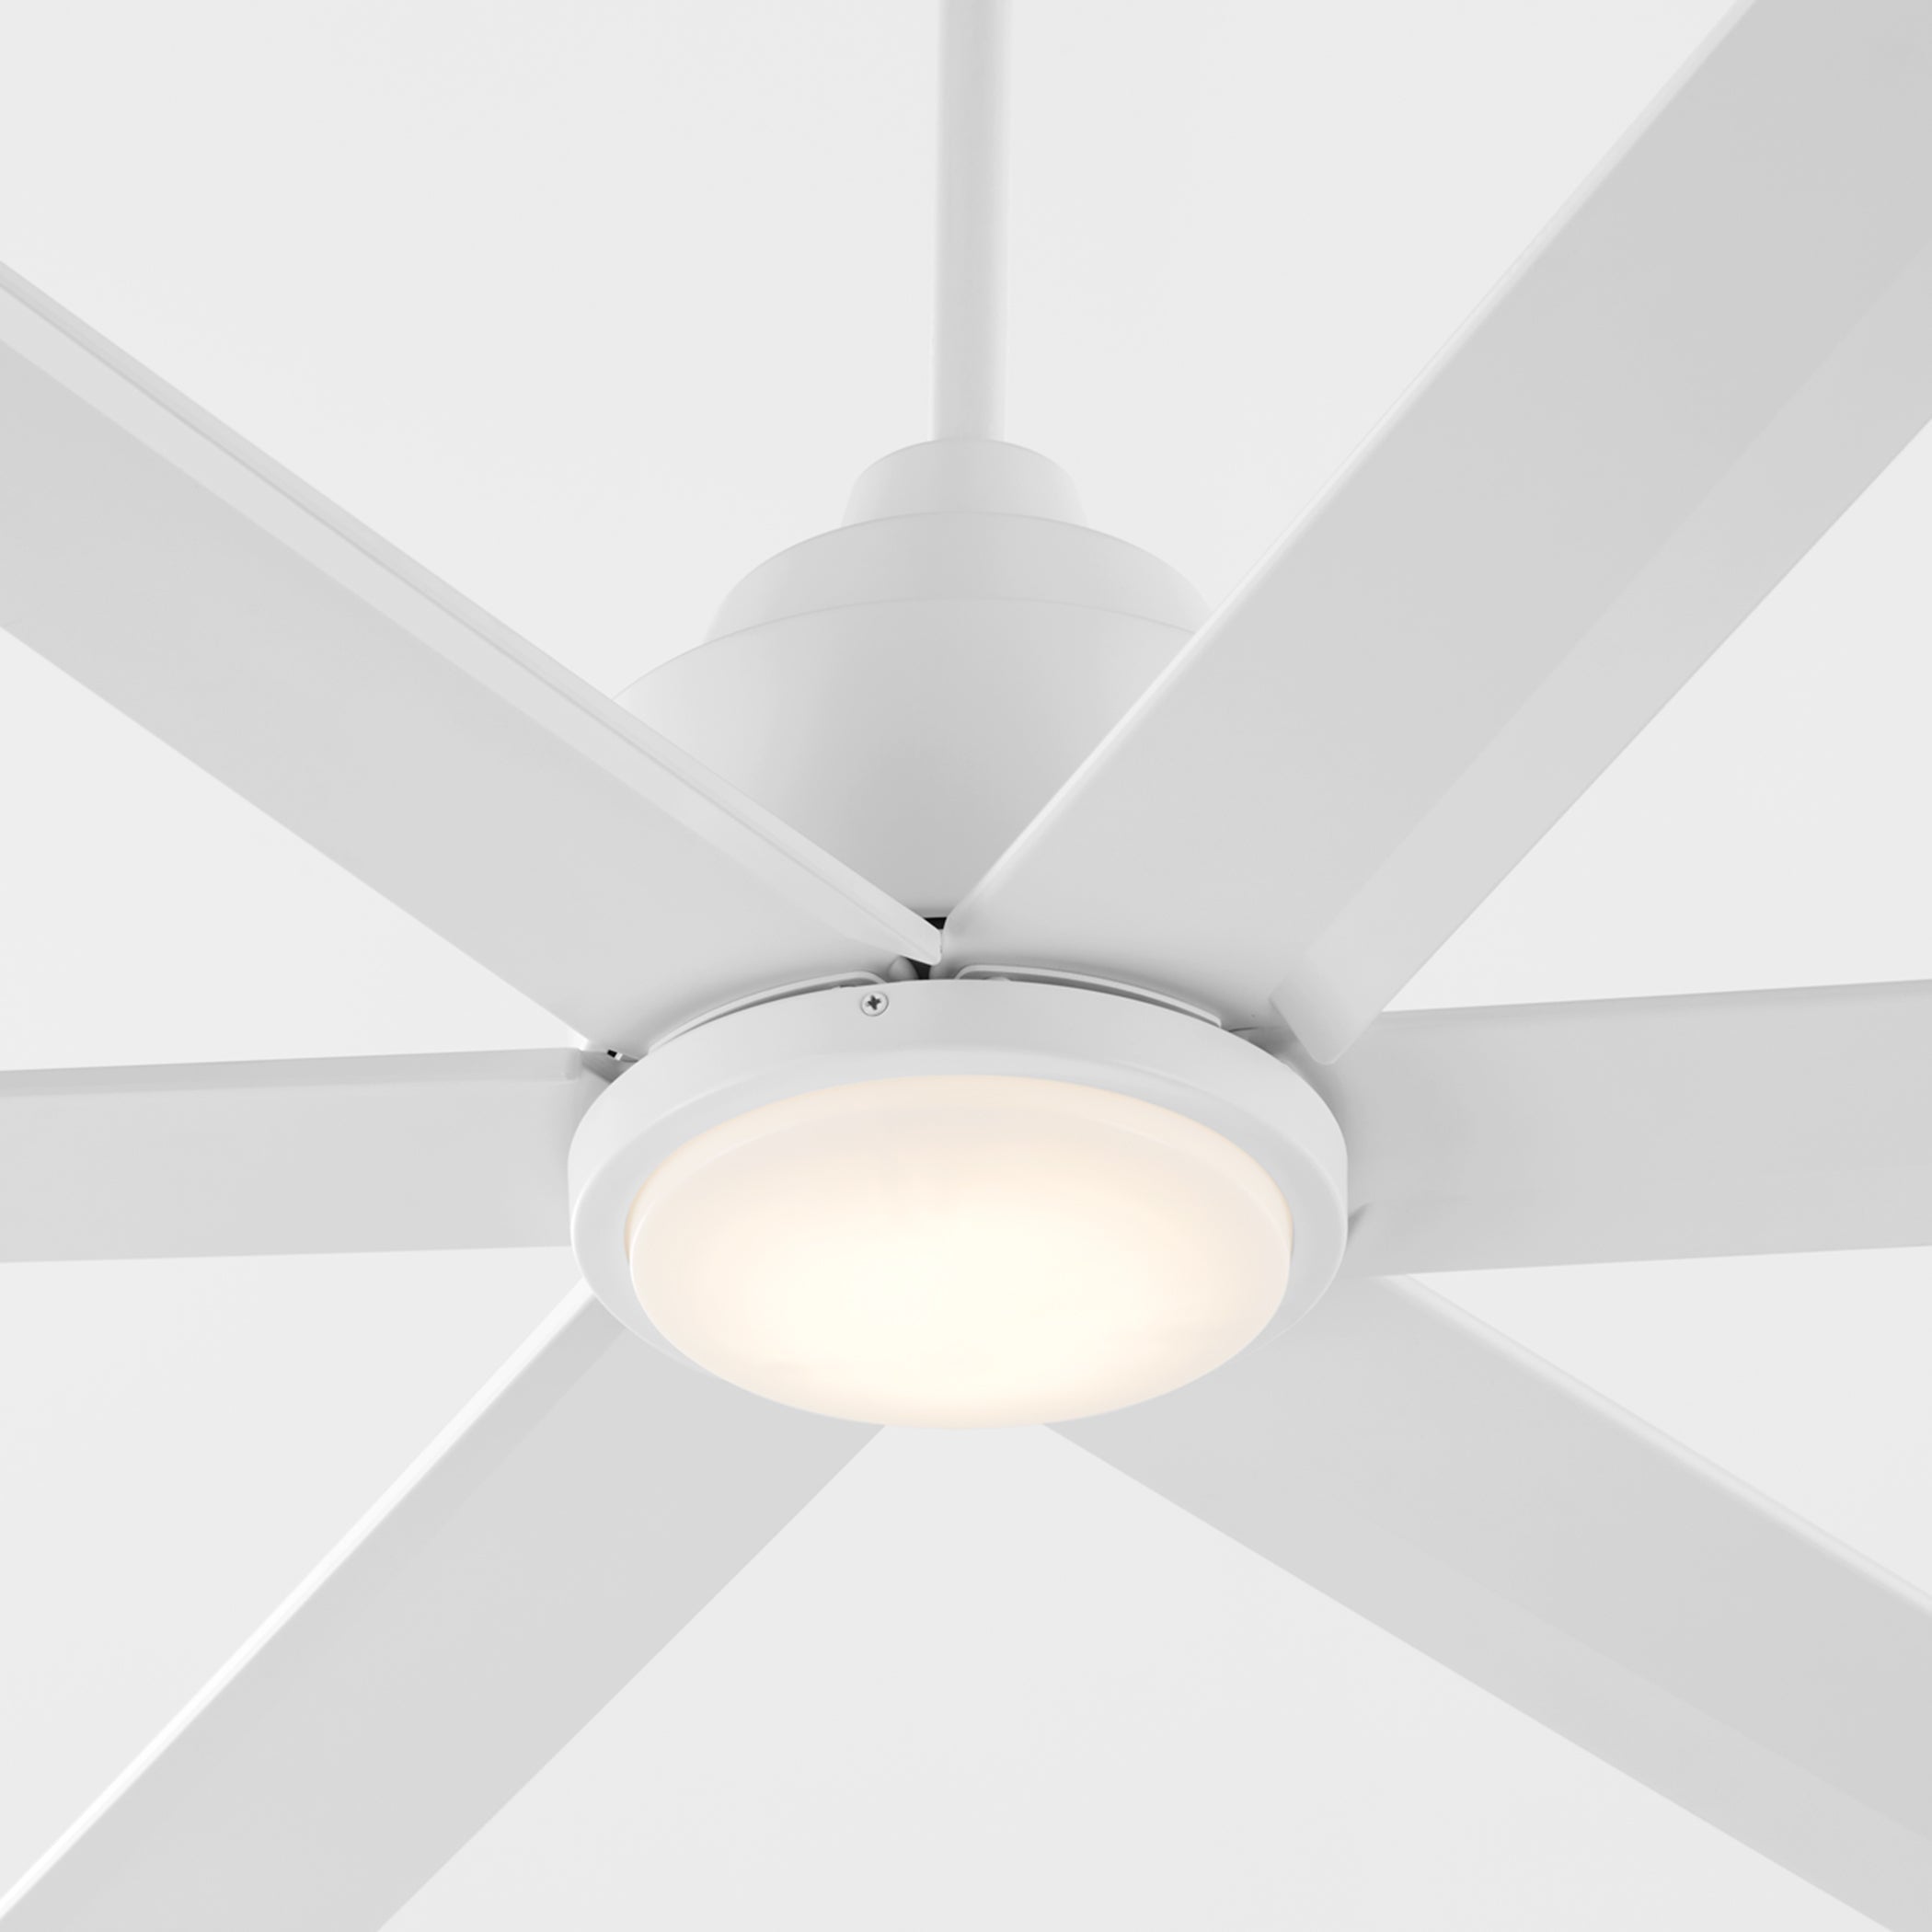 Quorum Titus 20656-8 Ceiling Fan 65 Inch 6 Blades, Damp Listed - Studio White